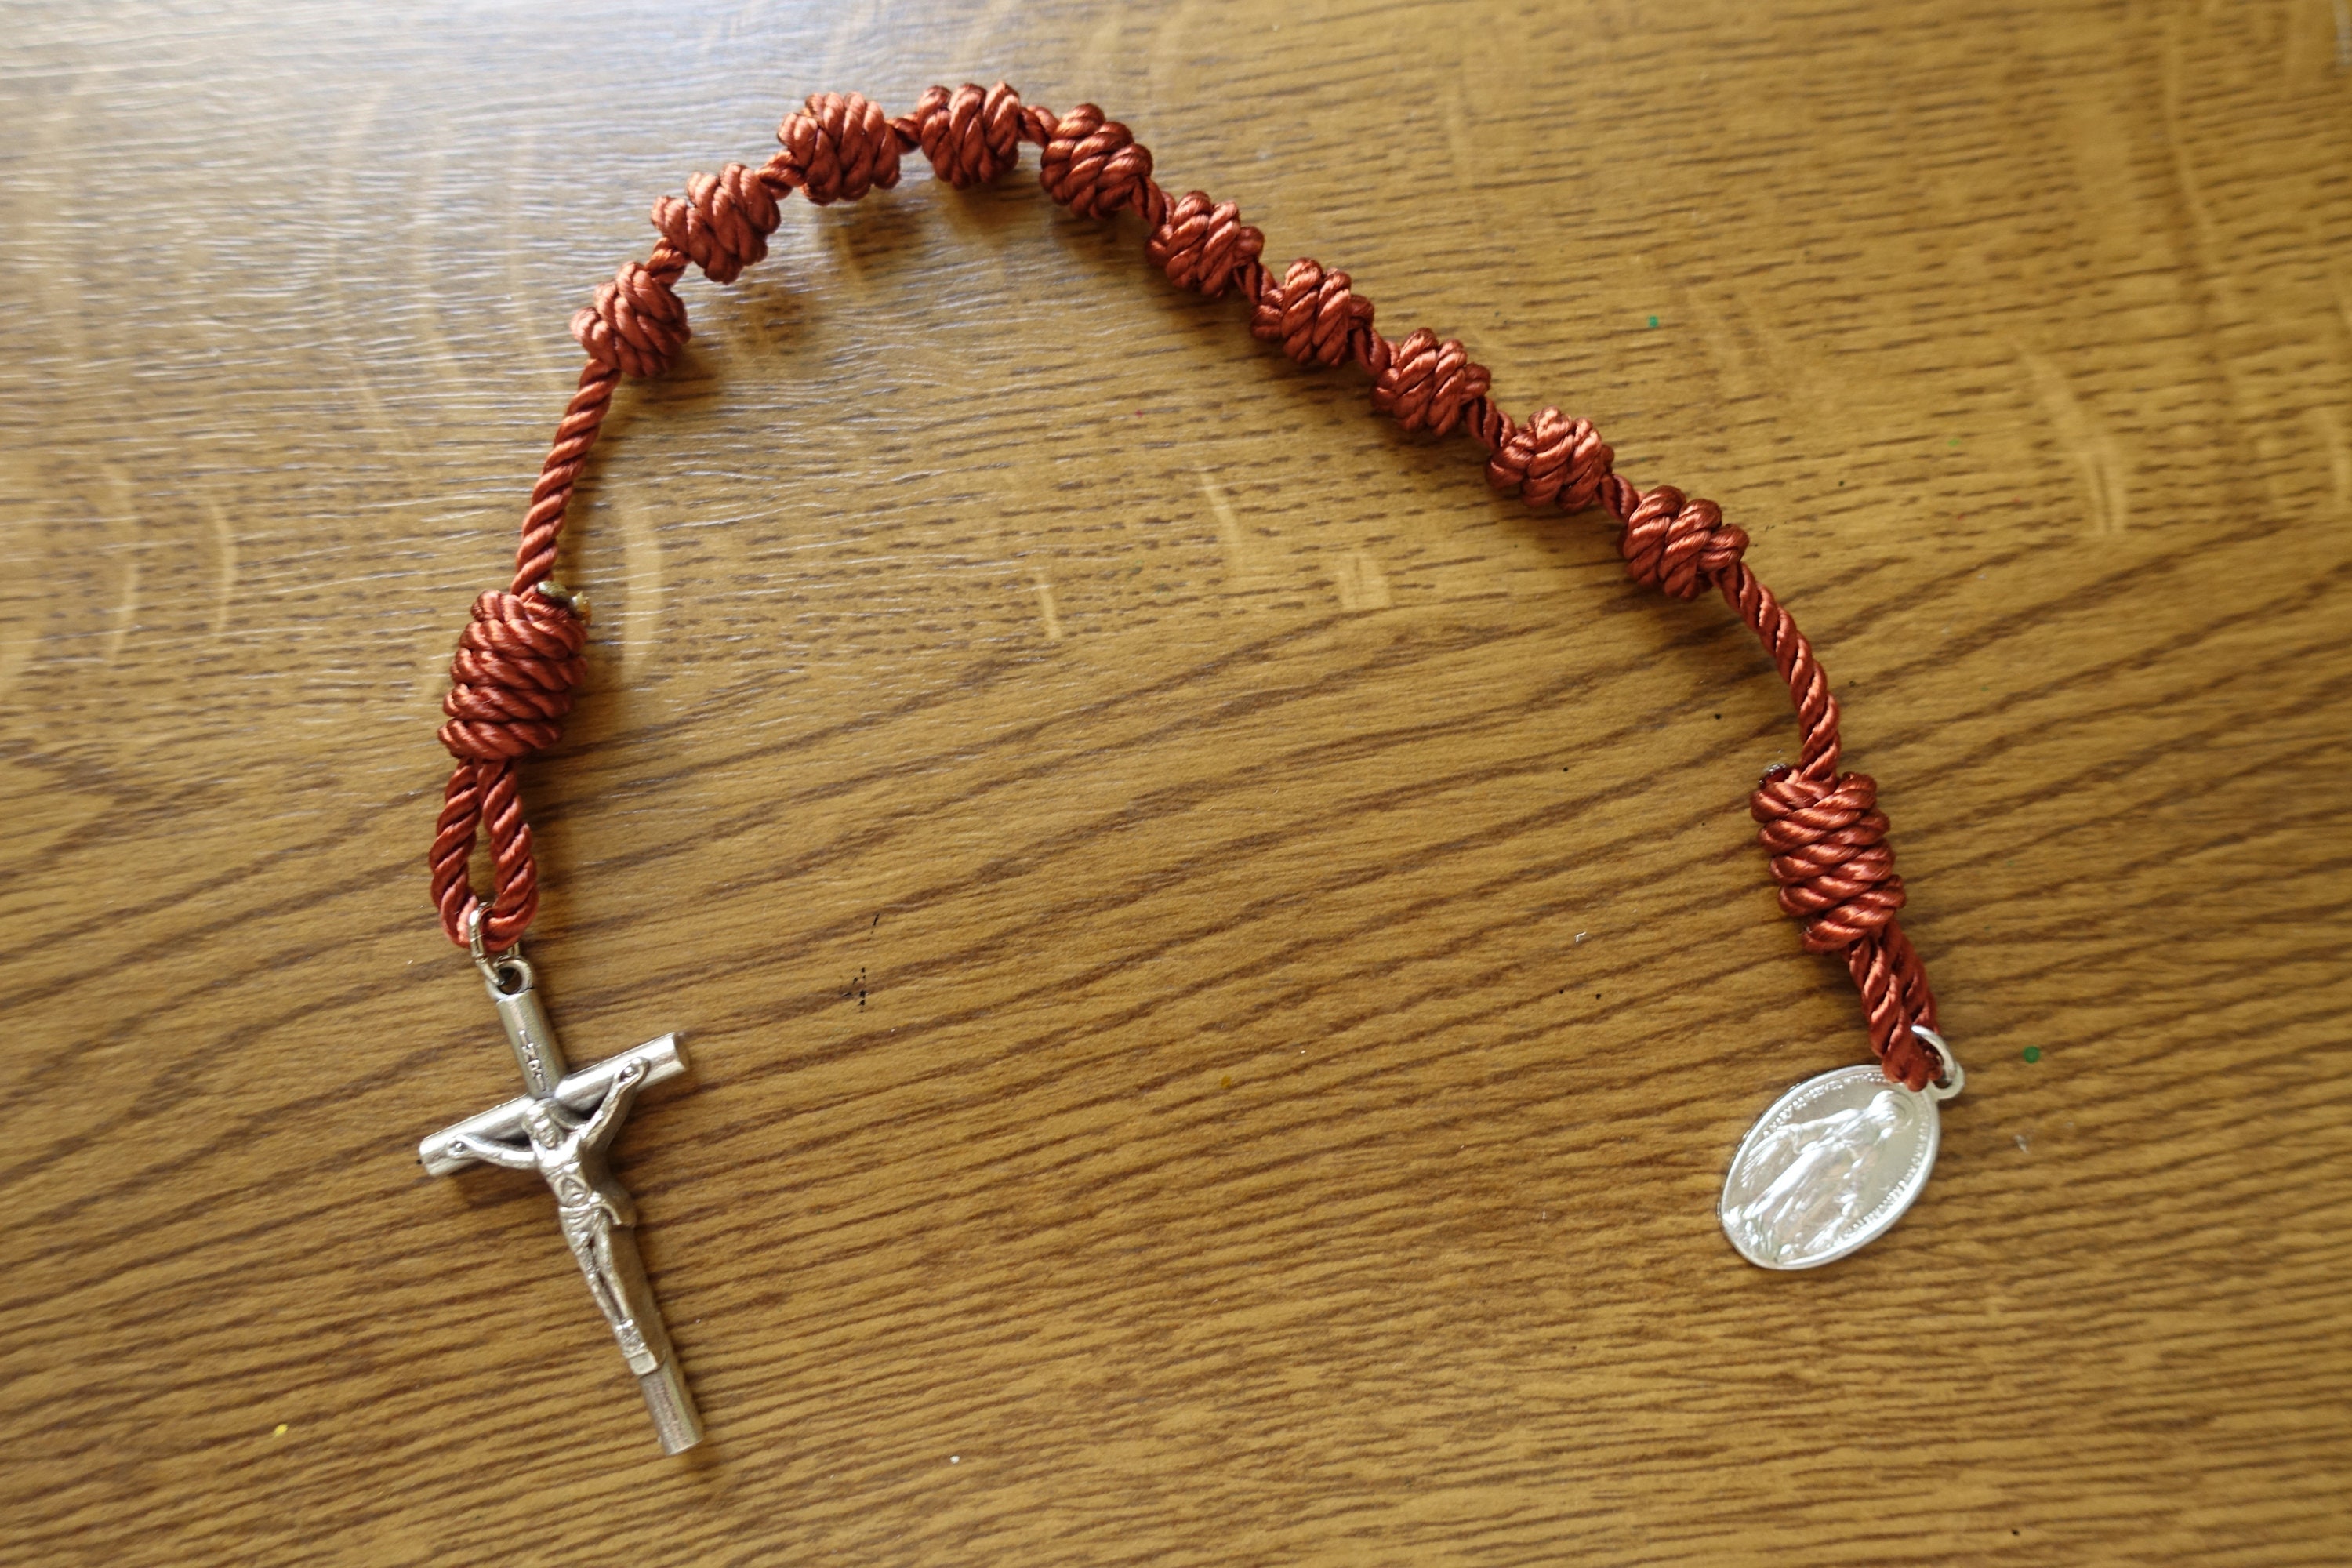 Single Decade Knotted Cord Rosary Rope 'tenner' Handmade